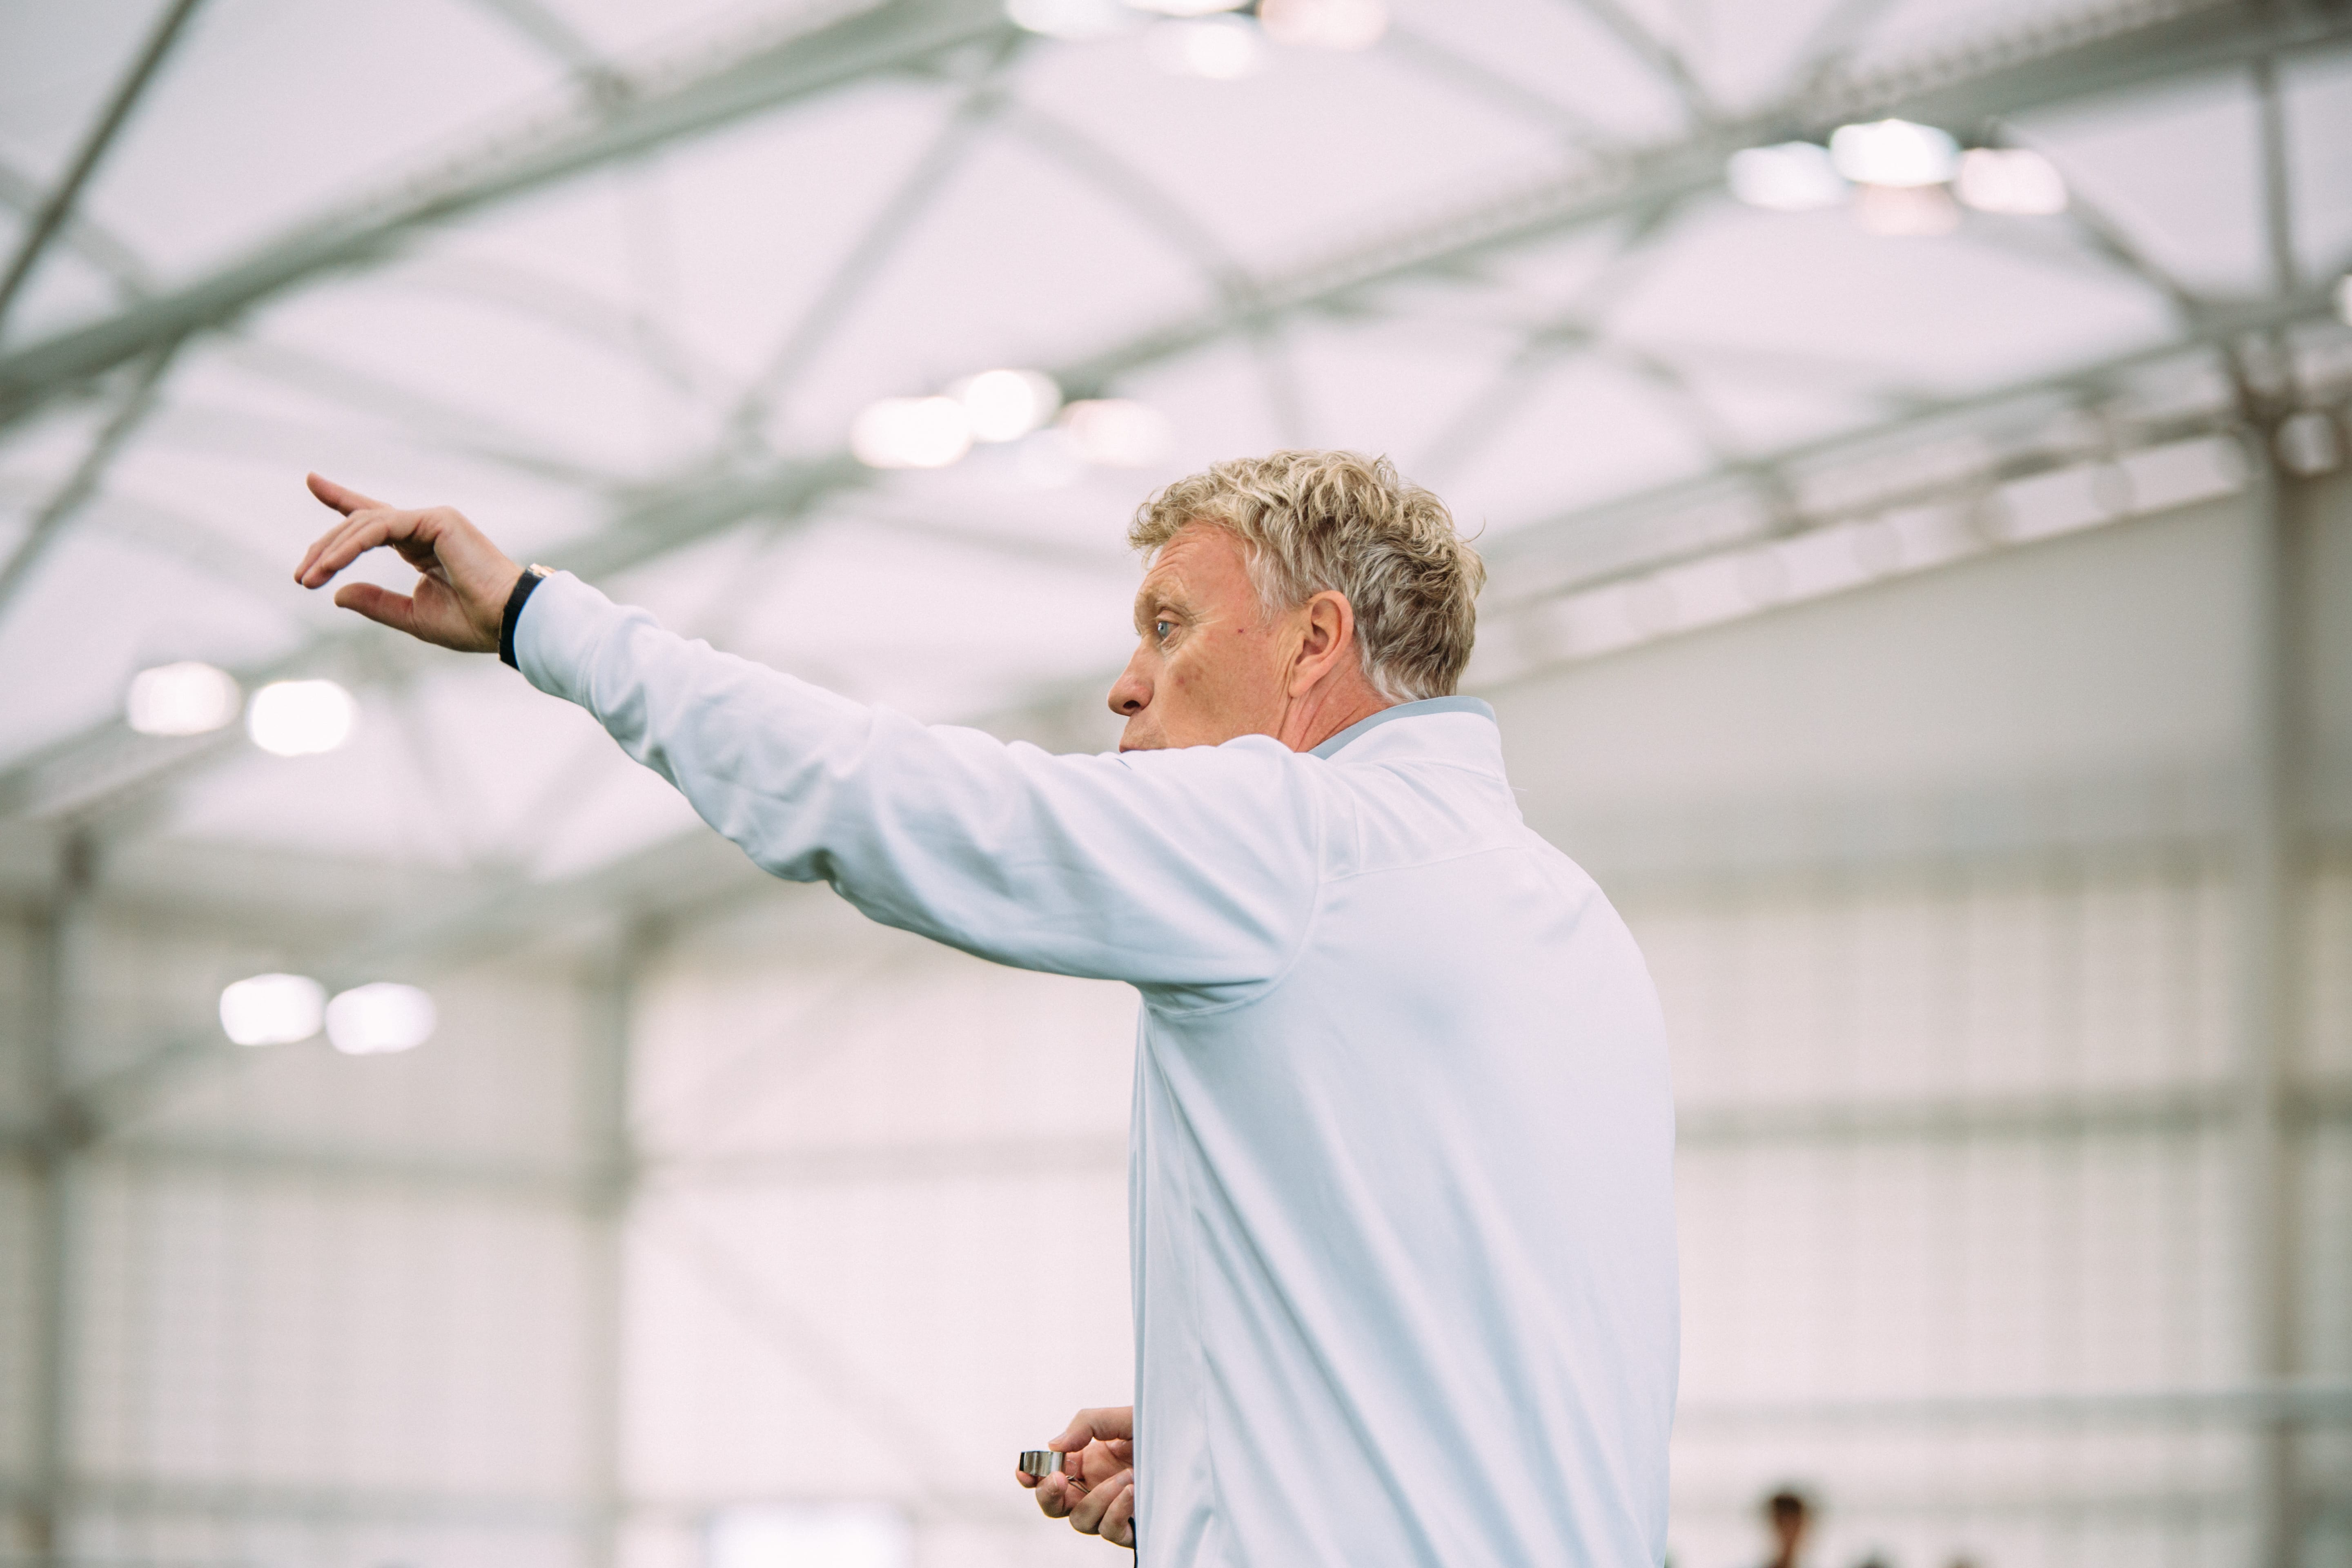 Defining the Roles and Responsibilities of Your Coaches